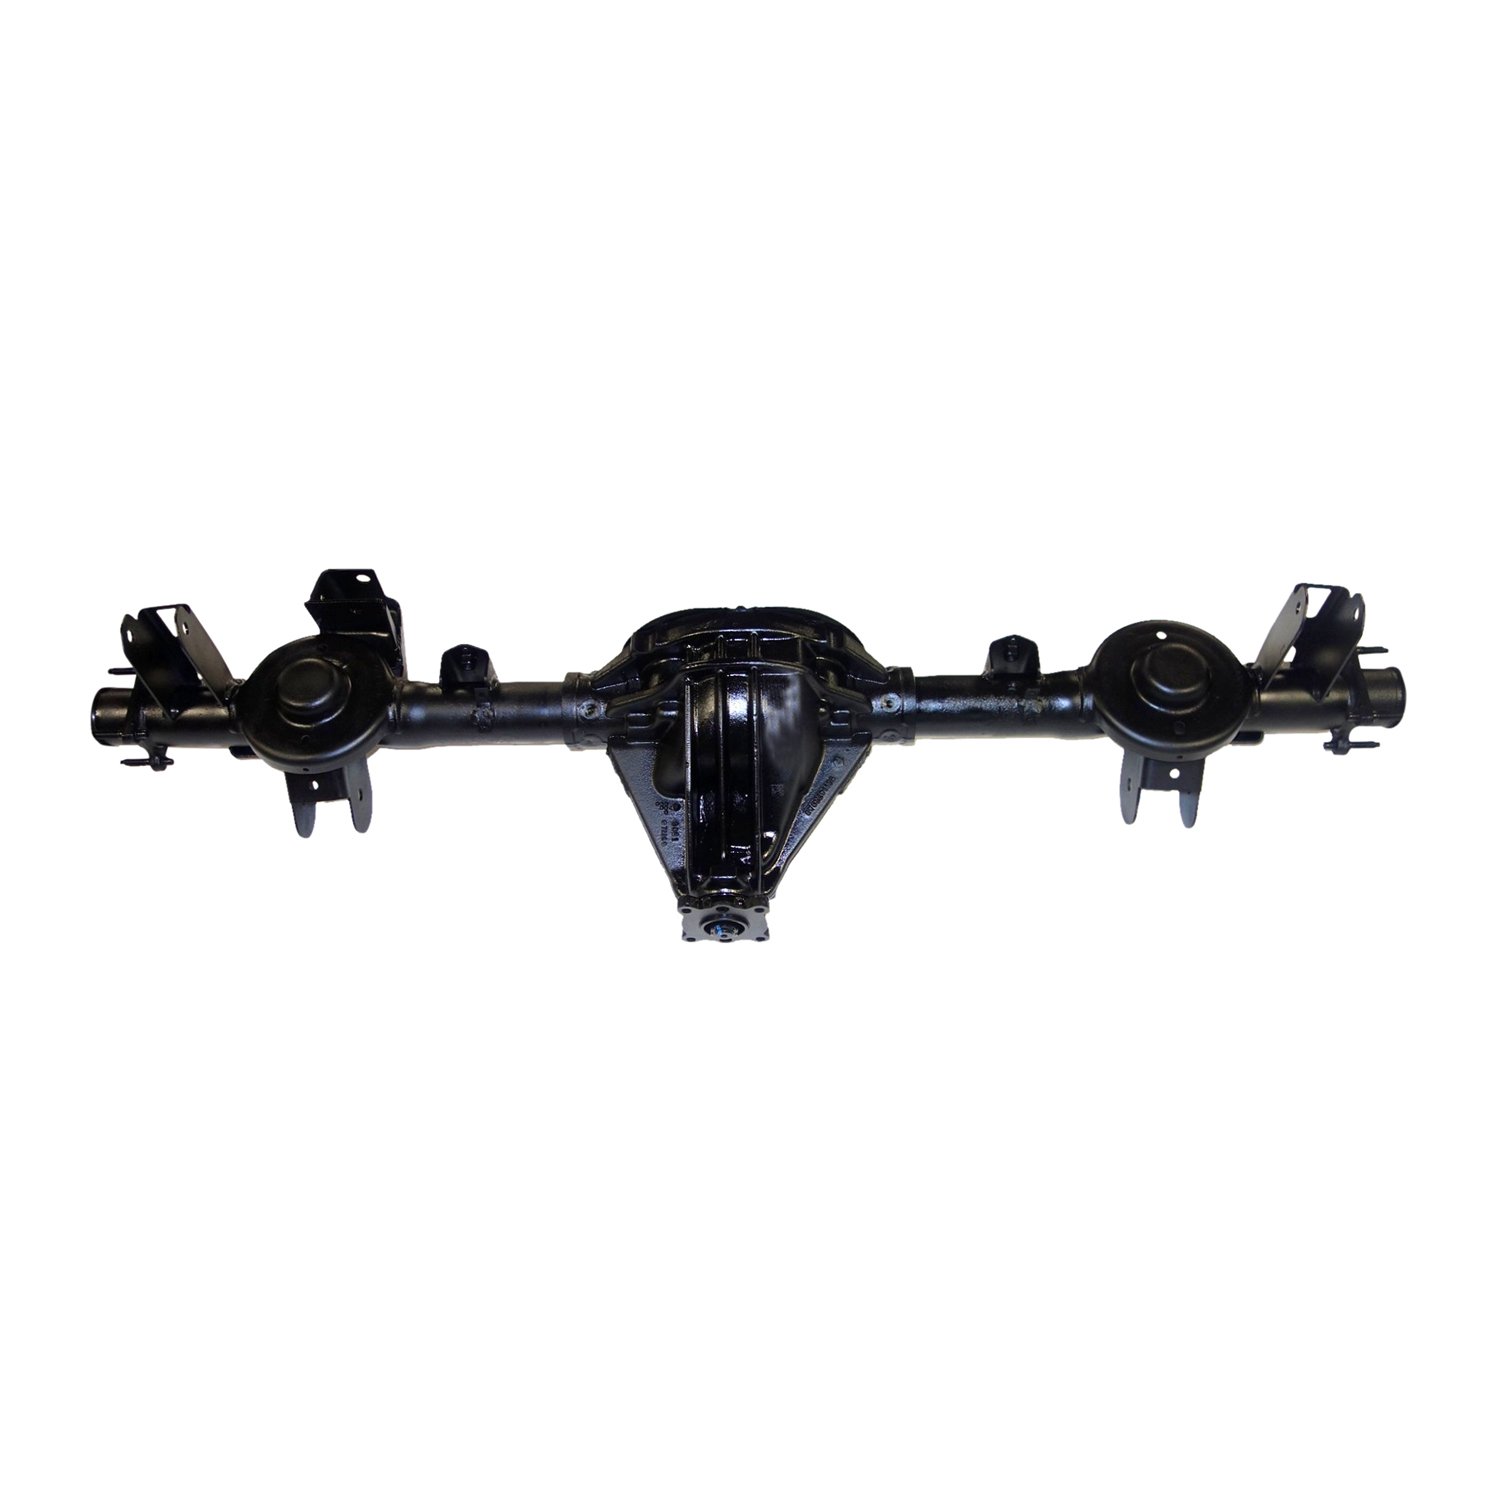 Remanufactured Axle Assembly for Chy 8.25" 07-10 Jeep Liberty 3.55 Ratio, Posi